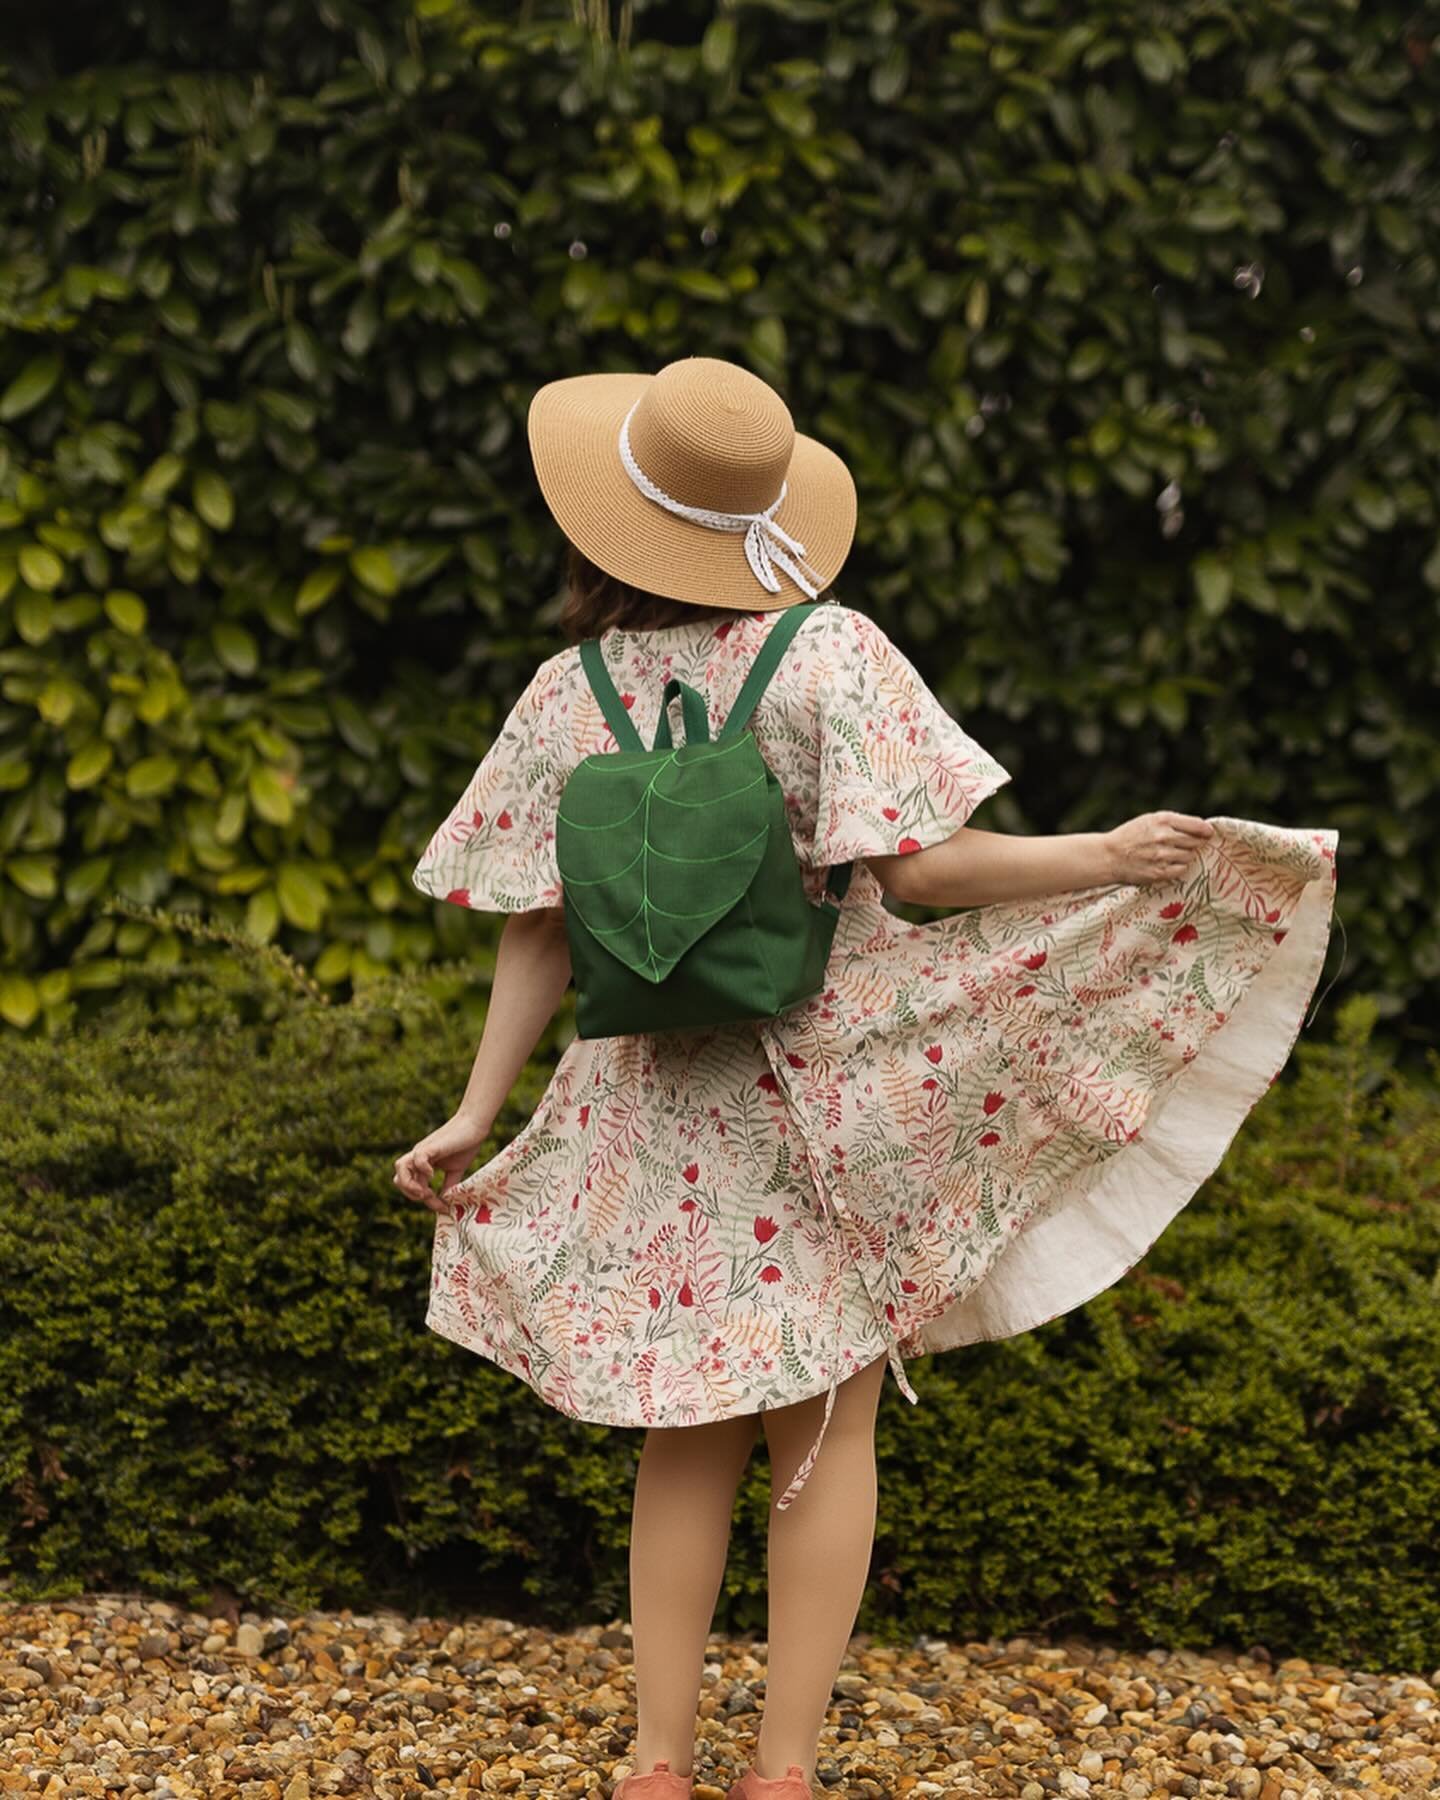 Ready for the summer weather. Wearing my favorite wrap dress from @sondeflor with my favorite green leaf backpack. This is one of the backpack designs that will be available in our next shop update.